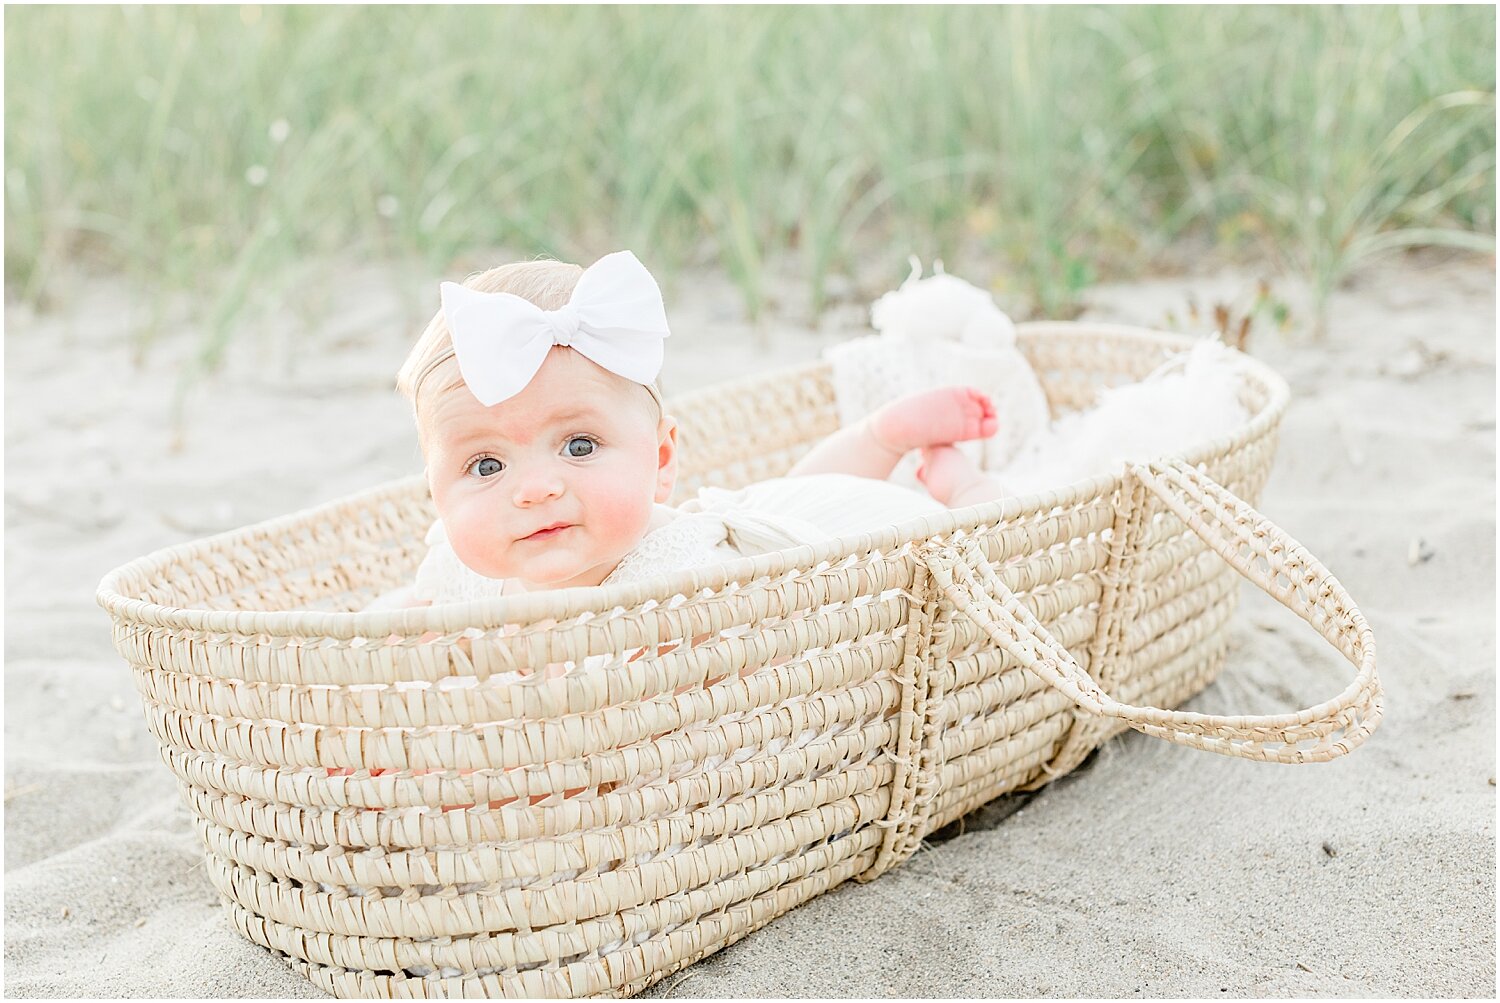 Golden hour sunset family session on the beach in Westport, CT | Kristin Wood Photography